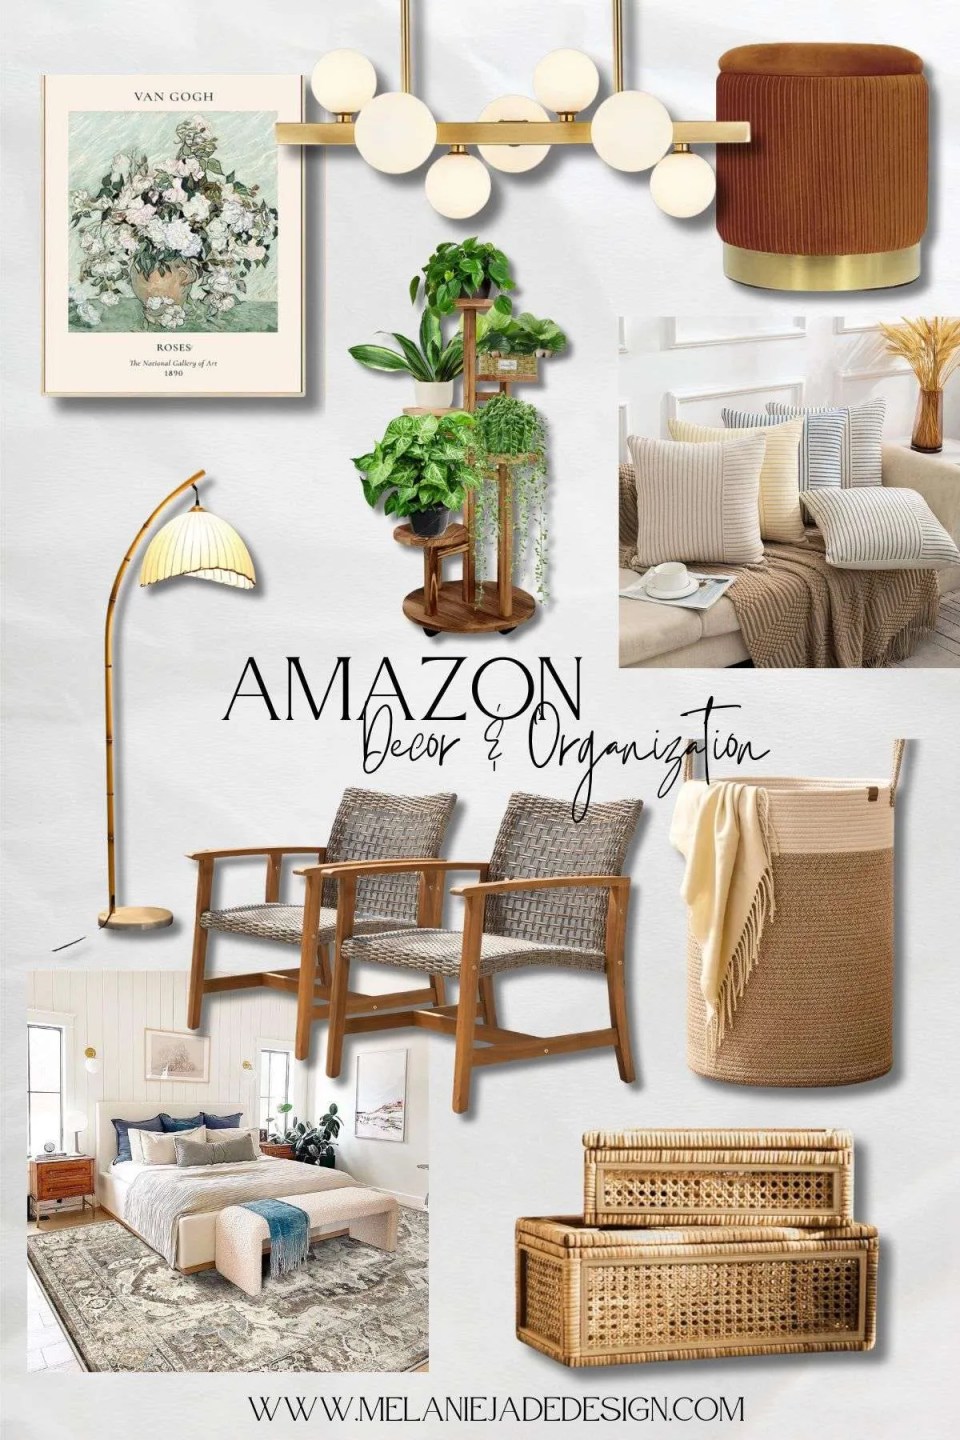 a moodboard of biophilic products from amazon including baskets, chairs, plants and artwork